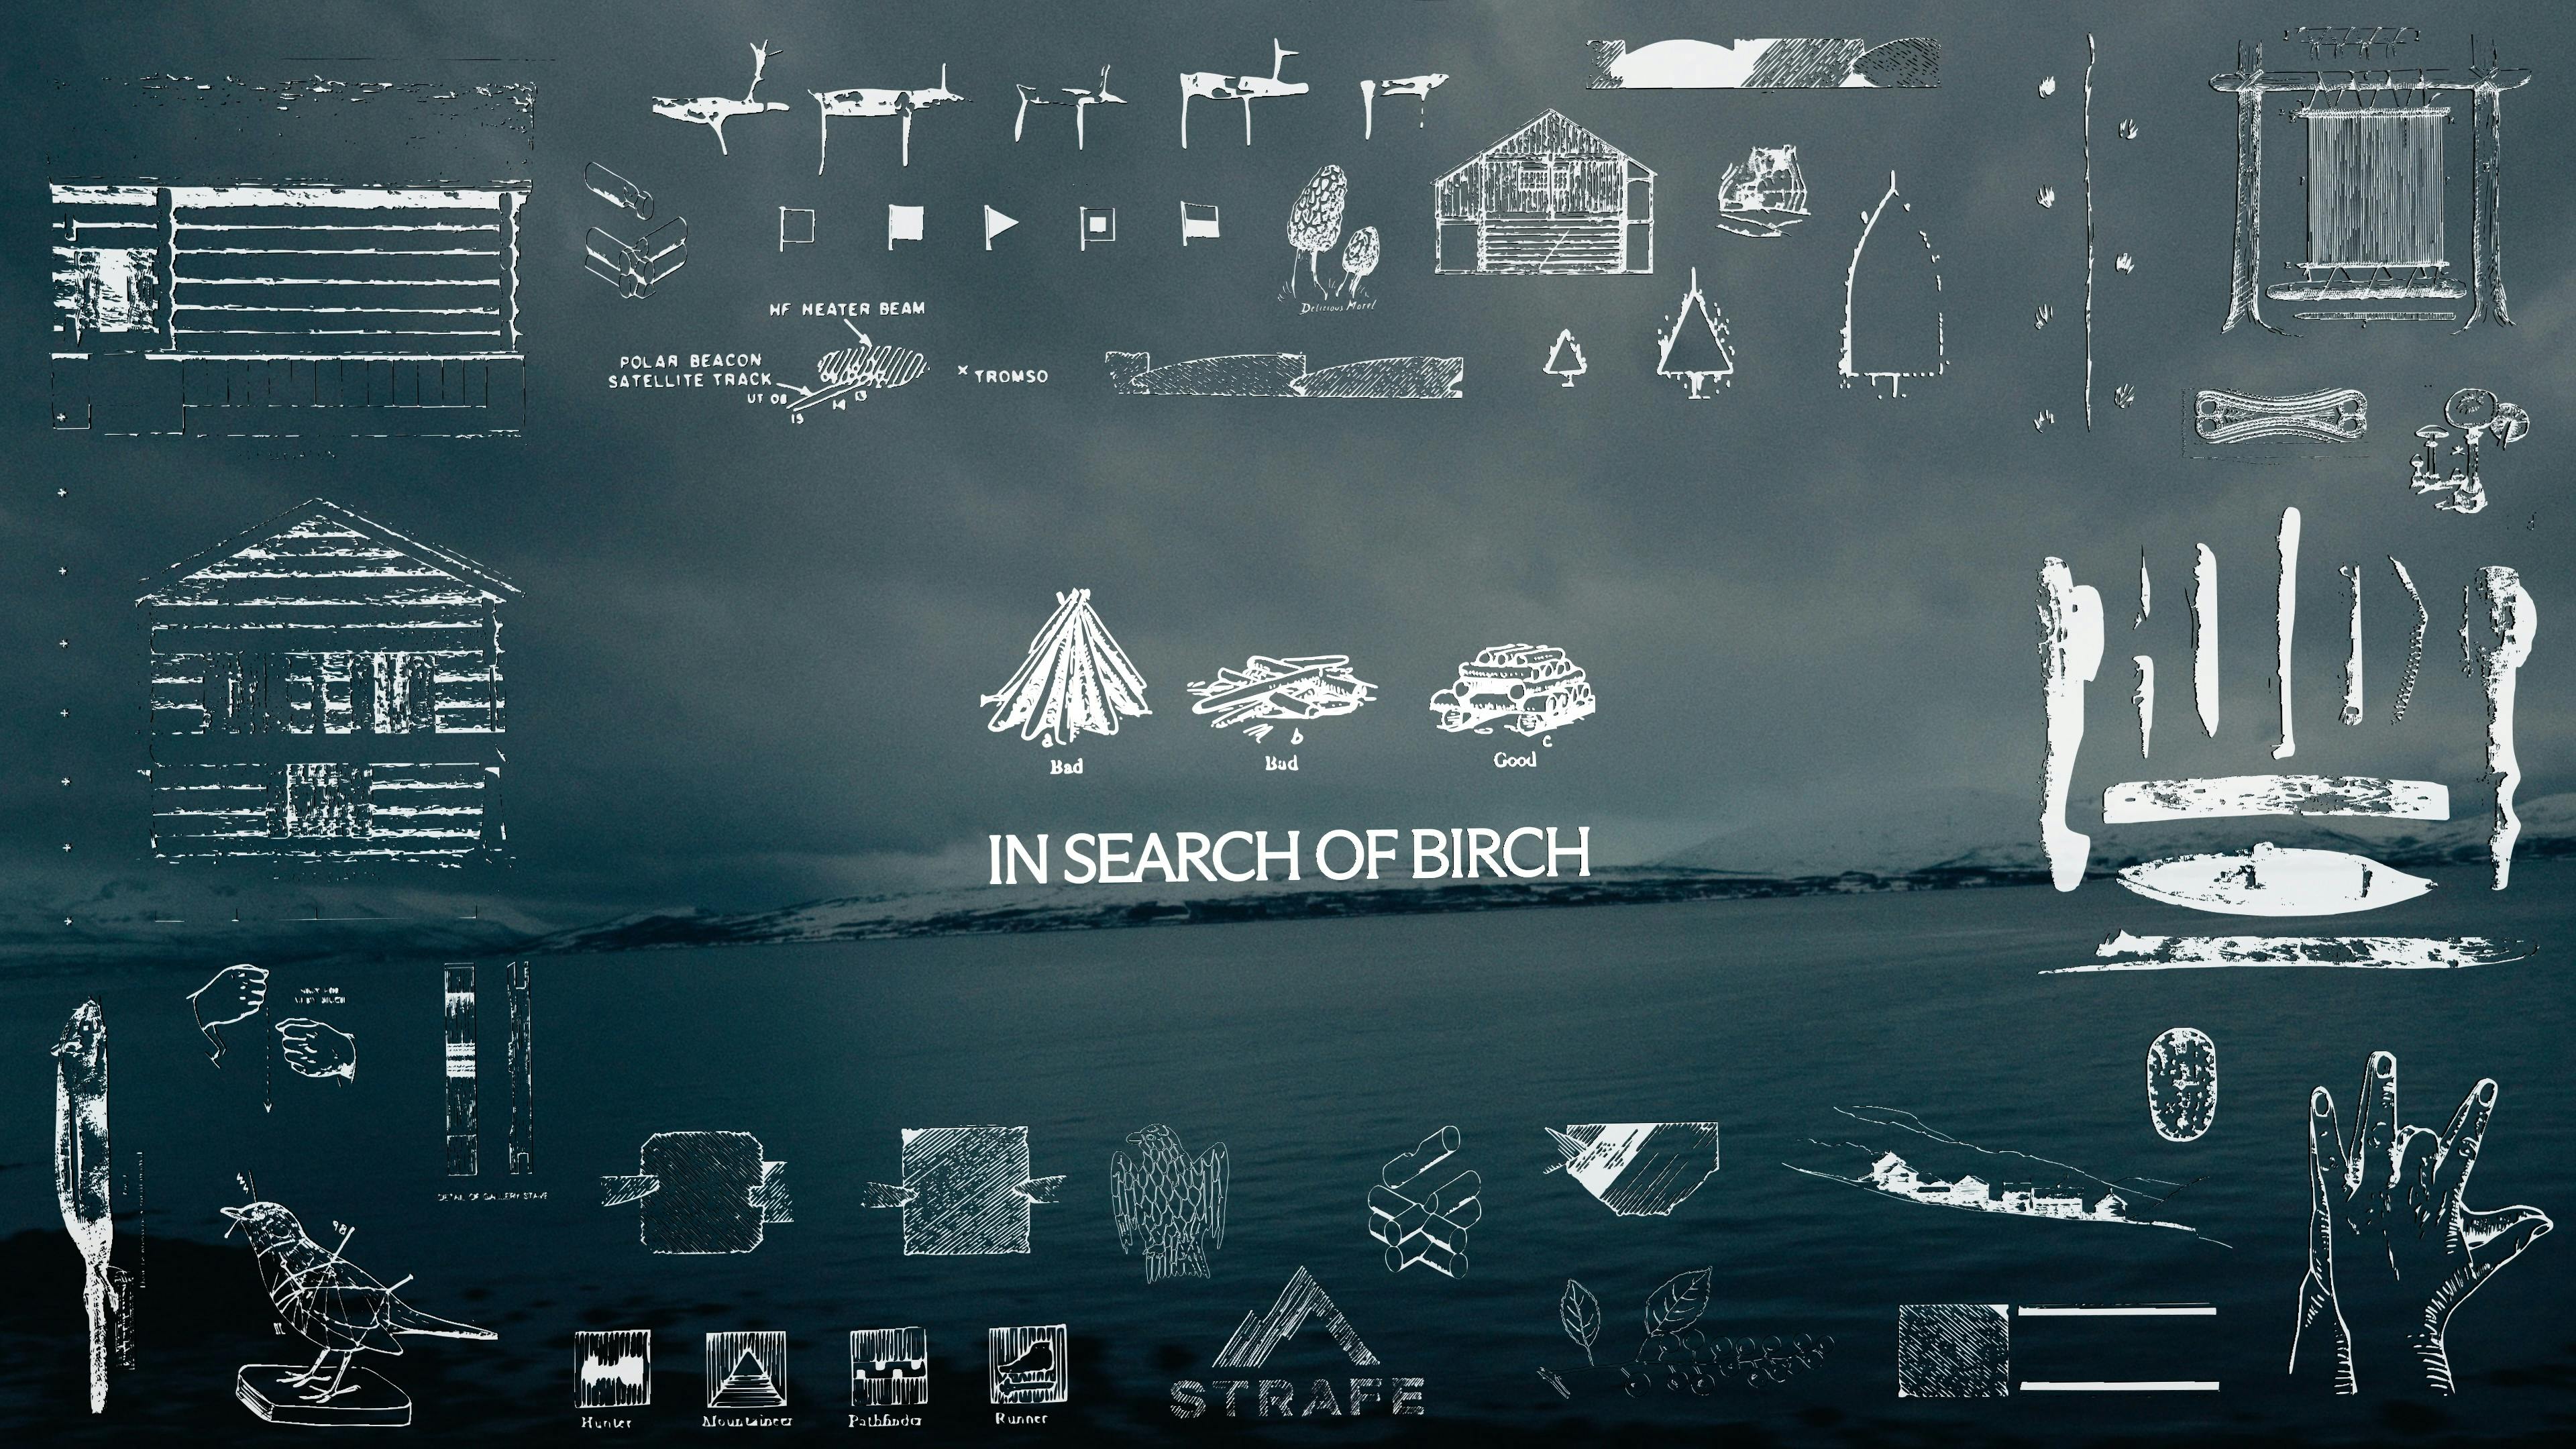 The title card of the ski film "In Search of Birch"